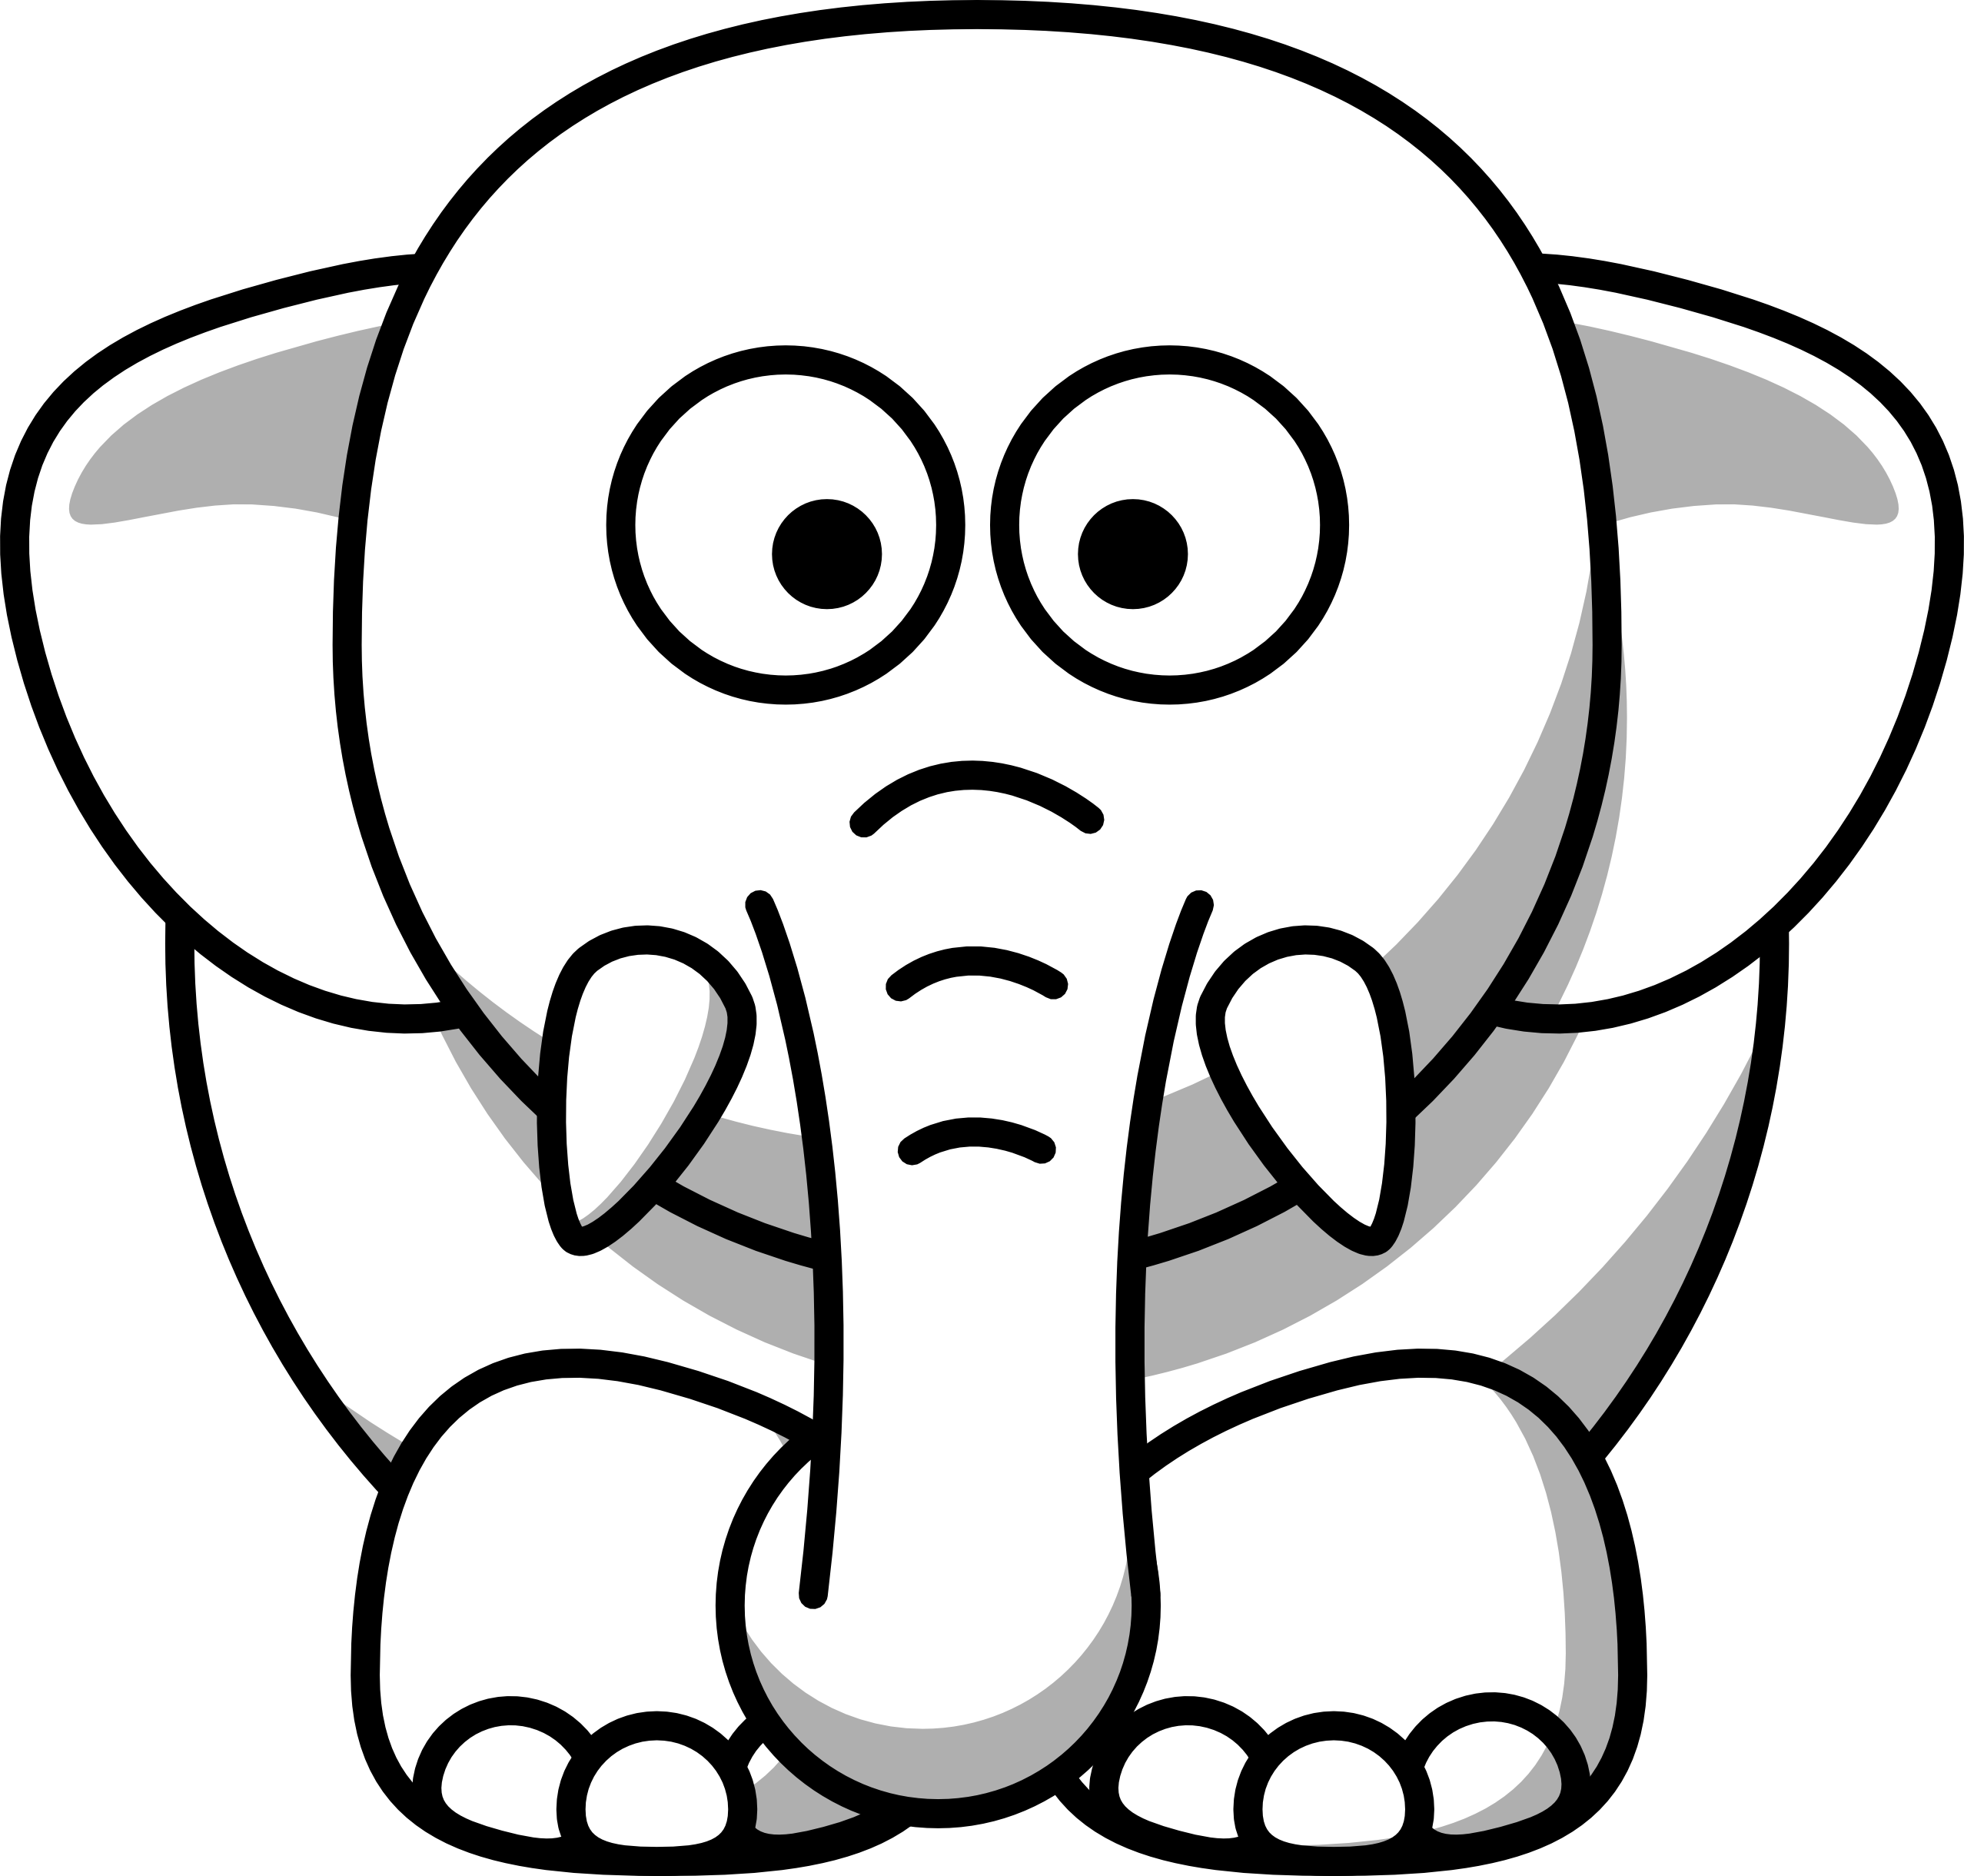 E clipart elephant coloring page. Animals black and white